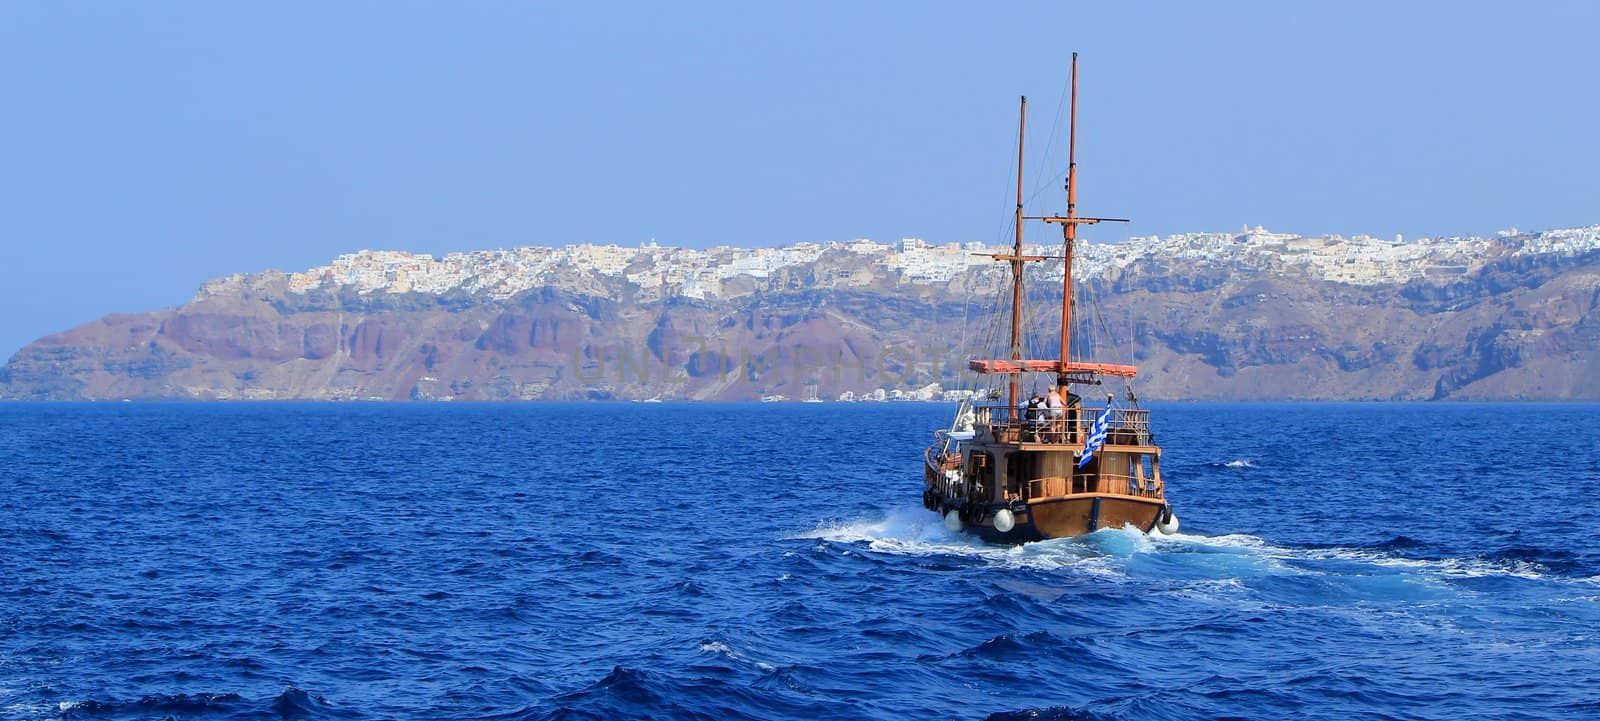 Panoramic view of an old tourist boat going to Oia village on the cliff at Santorini, Greece